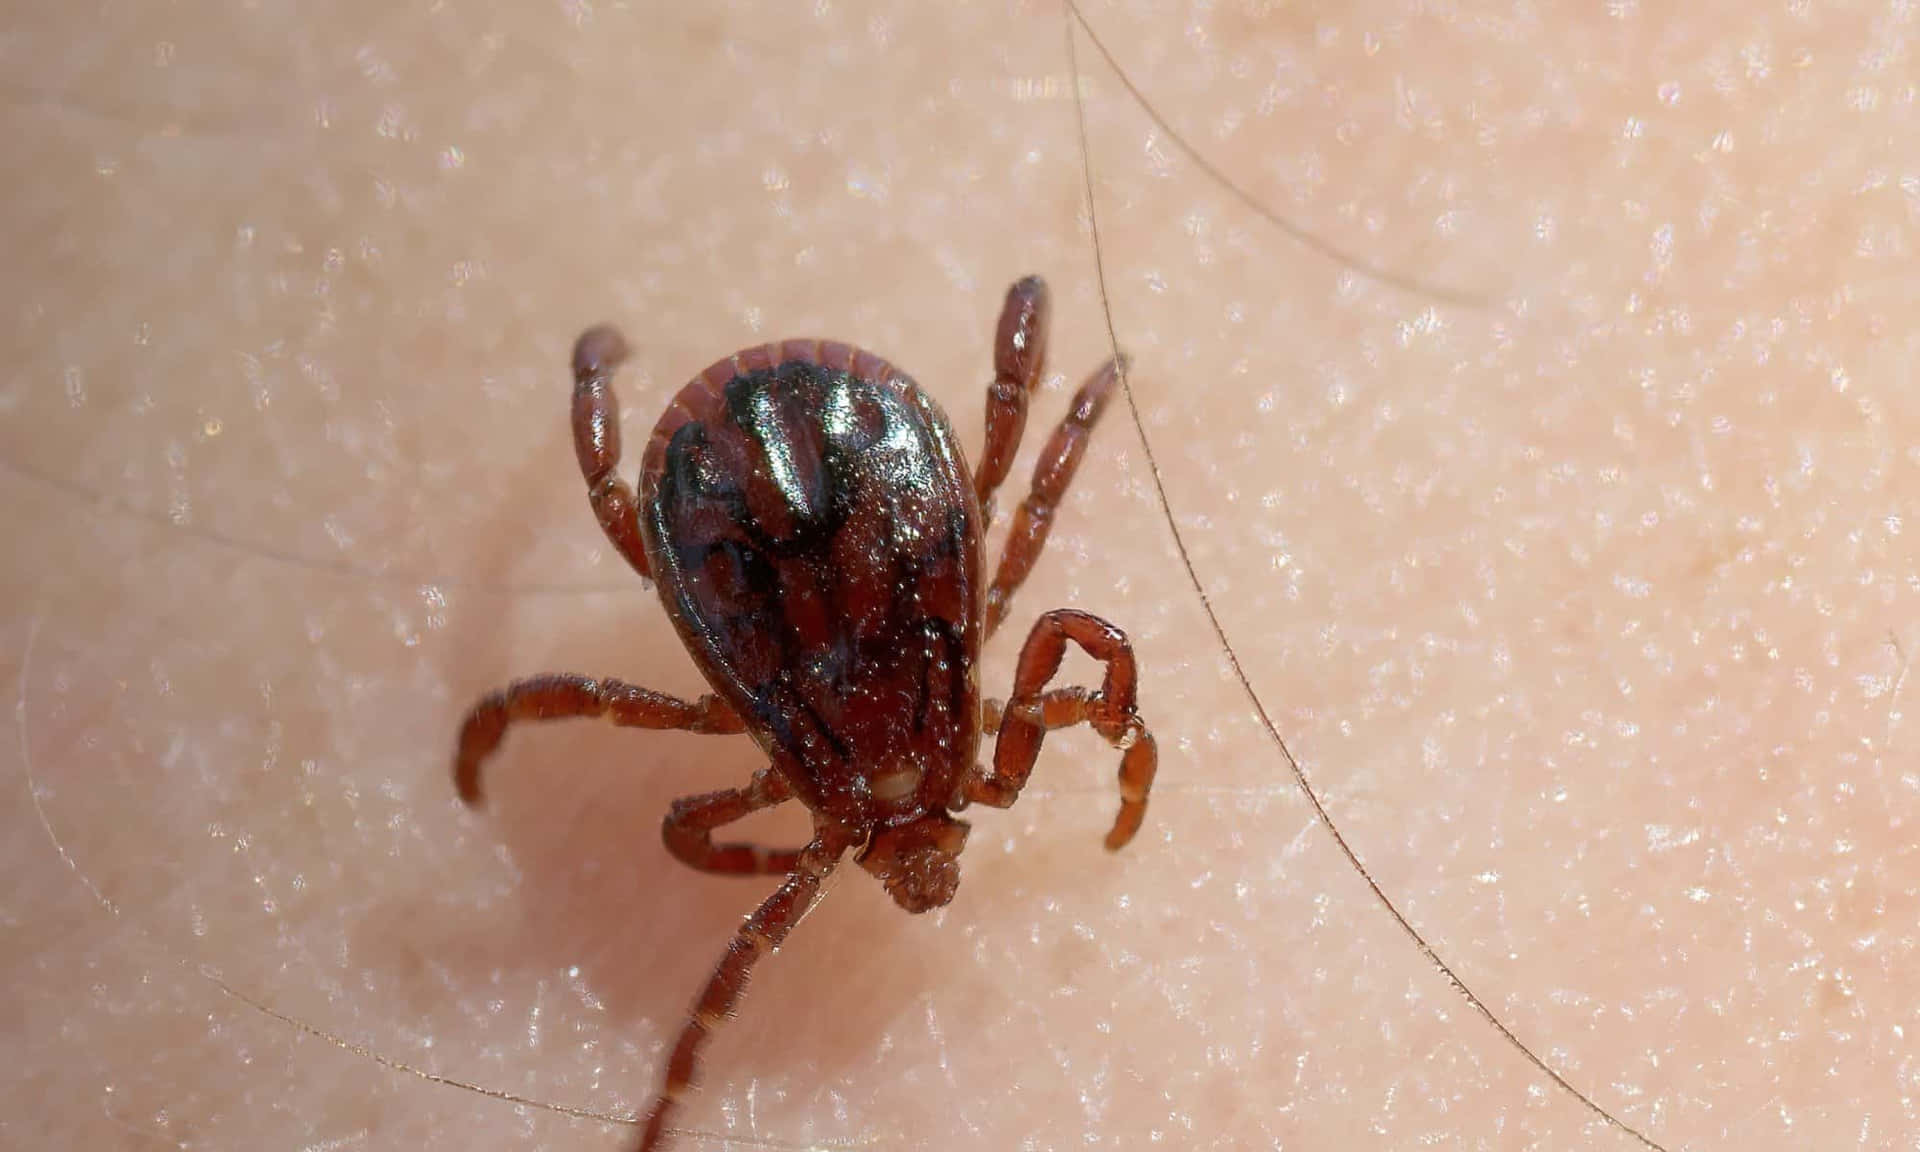 Extreme close-up view of a tick